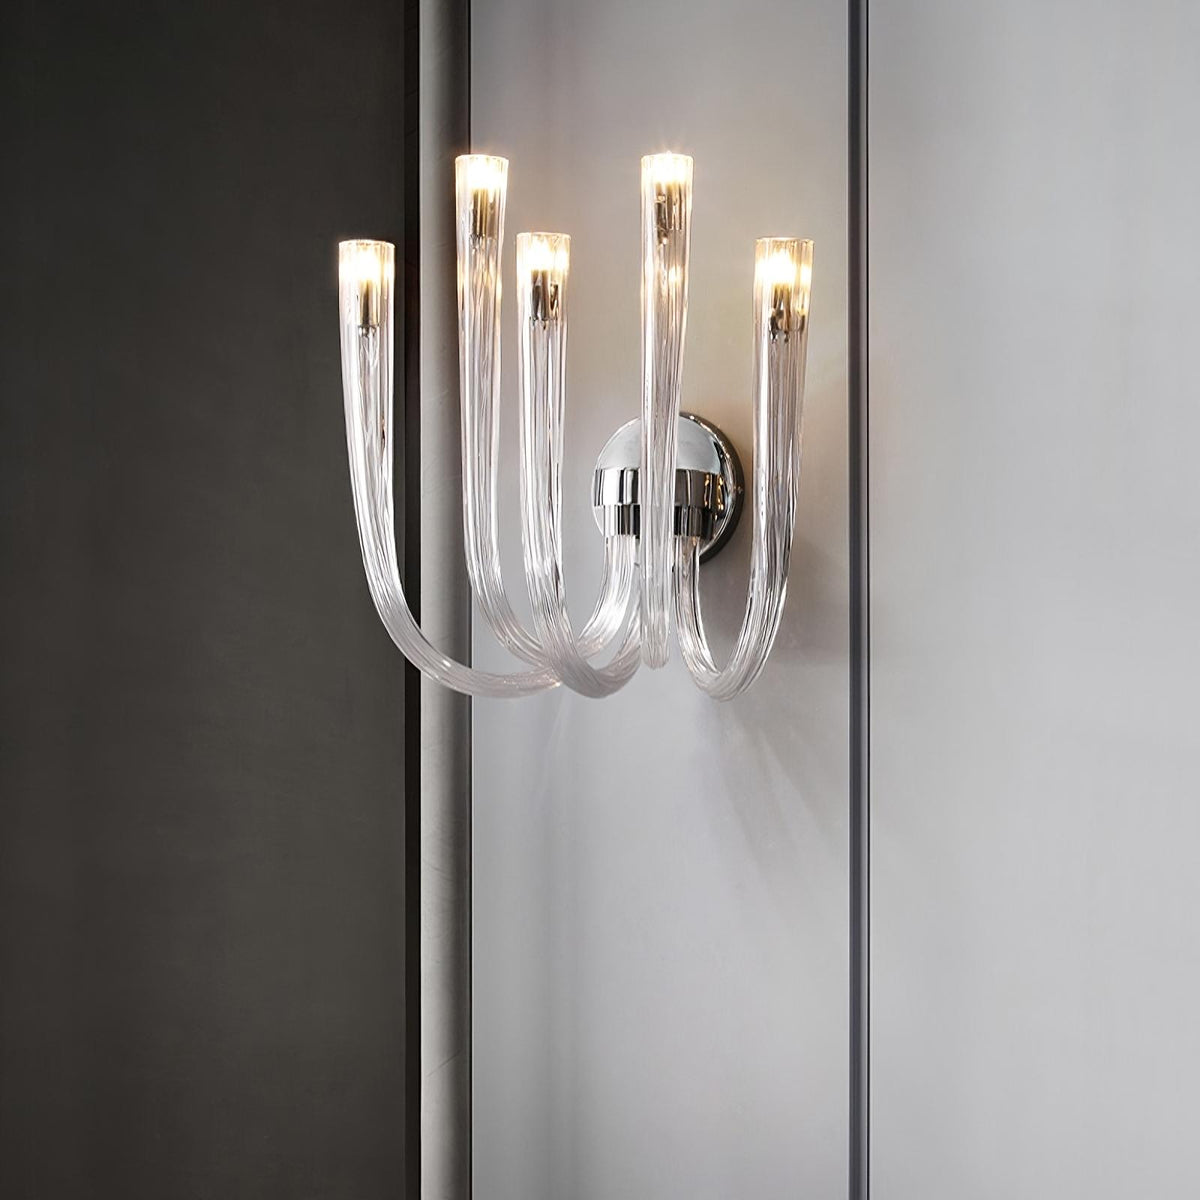 Candela Glass Wall Sconce